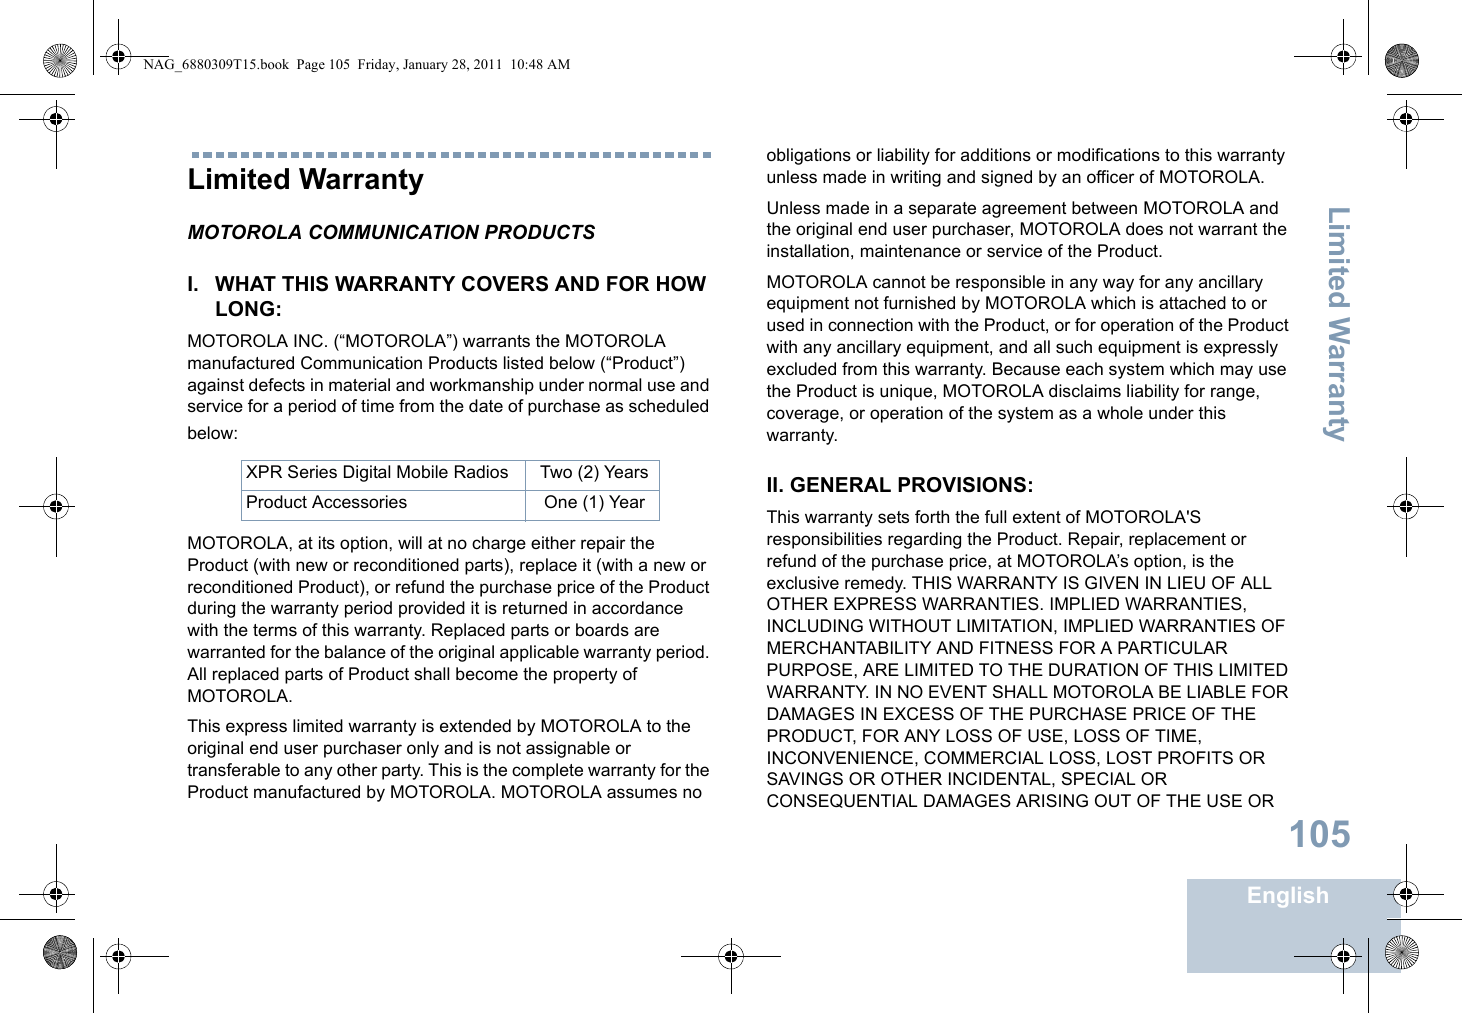 Limited WarrantyEnglish105Limited WarrantyMOTOROLA COMMUNICATION PRODUCTSI. WHAT THIS WARRANTY COVERS AND FOR HOW LONG:MOTOROLA INC. (“MOTOROLA”) warrants the MOTOROLA manufactured Communication Products listed below (“Product”) against defects in material and workmanship under normal use and service for a period of time from the date of purchase as scheduled below:MOTOROLA, at its option, will at no charge either repair the Product (with new or reconditioned parts), replace it (with a new or reconditioned Product), or refund the purchase price of the Product during the warranty period provided it is returned in accordance with the terms of this warranty. Replaced parts or boards are warranted for the balance of the original applicable warranty period. All replaced parts of Product shall become the property of MOTOROLA.This express limited warranty is extended by MOTOROLA to the original end user purchaser only and is not assignable or transferable to any other party. This is the complete warranty for the Product manufactured by MOTOROLA. MOTOROLA assumes no obligations or liability for additions or modifications to this warranty unless made in writing and signed by an officer of MOTOROLA. Unless made in a separate agreement between MOTOROLA and the original end user purchaser, MOTOROLA does not warrant the installation, maintenance or service of the Product.MOTOROLA cannot be responsible in any way for any ancillary equipment not furnished by MOTOROLA which is attached to or used in connection with the Product, or for operation of the Product with any ancillary equipment, and all such equipment is expressly excluded from this warranty. Because each system which may use the Product is unique, MOTOROLA disclaims liability for range, coverage, or operation of the system as a whole under this warranty.II. GENERAL PROVISIONS:This warranty sets forth the full extent of MOTOROLA&apos;S responsibilities regarding the Product. Repair, replacement or refund of the purchase price, at MOTOROLA’s option, is the exclusive remedy. THIS WARRANTY IS GIVEN IN LIEU OF ALL OTHER EXPRESS WARRANTIES. IMPLIED WARRANTIES, INCLUDING WITHOUT LIMITATION, IMPLIED WARRANTIES OF MERCHANTABILITY AND FITNESS FOR A PARTICULAR PURPOSE, ARE LIMITED TO THE DURATION OF THIS LIMITED WARRANTY. IN NO EVENT SHALL MOTOROLA BE LIABLE FOR DAMAGES IN EXCESS OF THE PURCHASE PRICE OF THE PRODUCT, FOR ANY LOSS OF USE, LOSS OF TIME, INCONVENIENCE, COMMERCIAL LOSS, LOST PROFITS OR SAVINGS OR OTHER INCIDENTAL, SPECIAL OR CONSEQUENTIAL DAMAGES ARISING OUT OF THE USE OR XPR Series Digital Mobile Radios Two (2) YearsProduct Accessories One (1) YearNAG_6880309T15.book  Page 105  Friday, January 28, 2011  10:48 AM